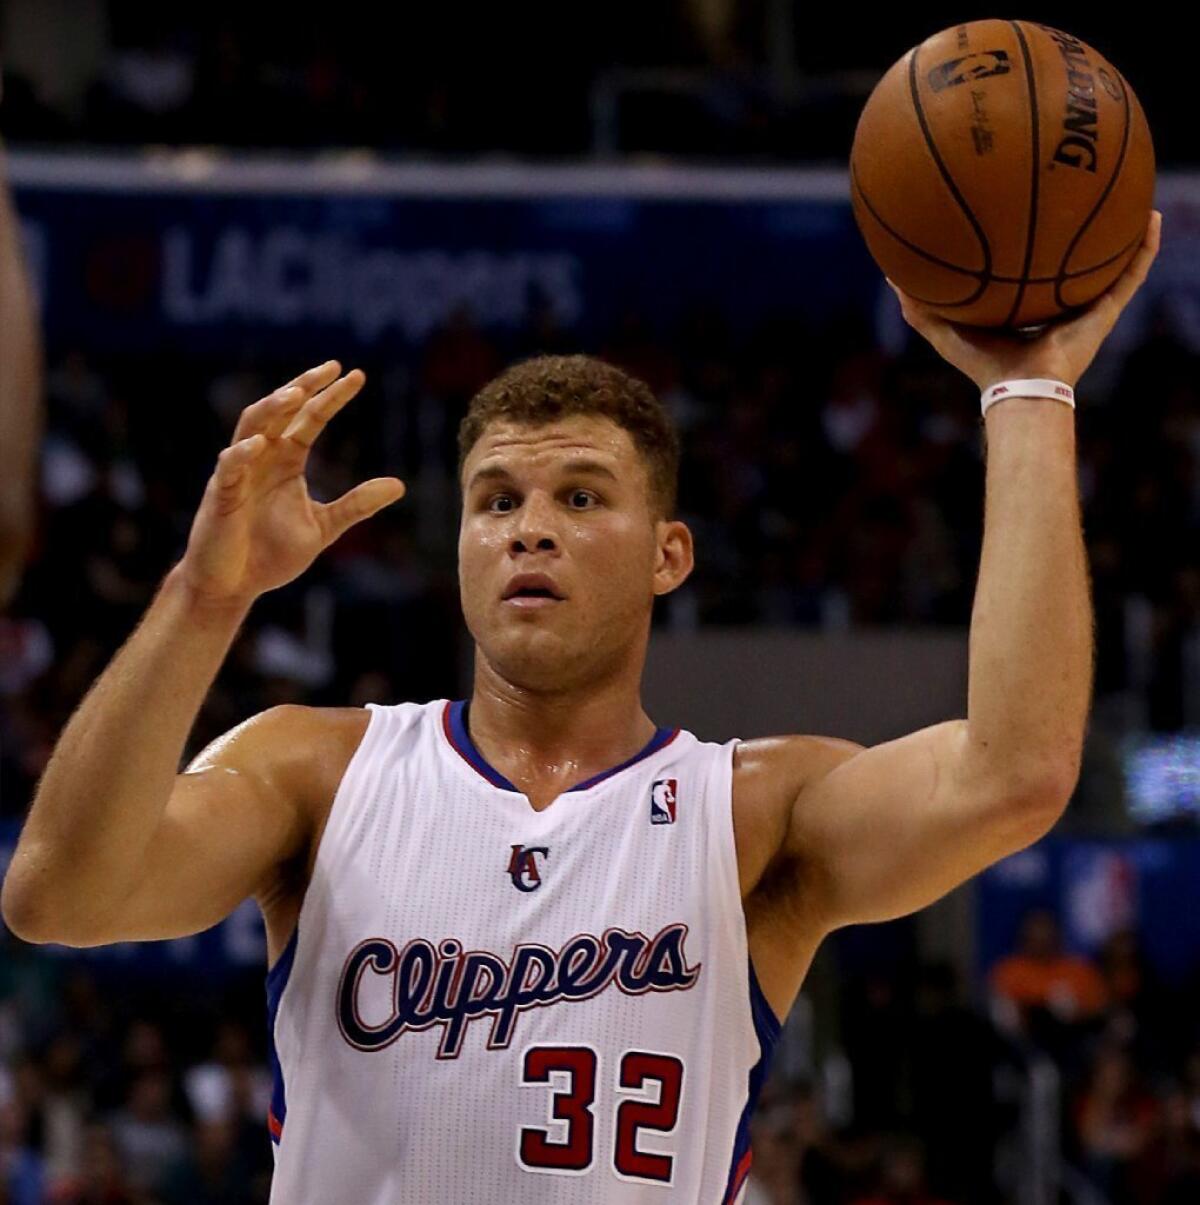 Blake Griffin and the Clippers face back-to-back road games against the Minnesota Timberwolves and the Oklahoma City Thunder.